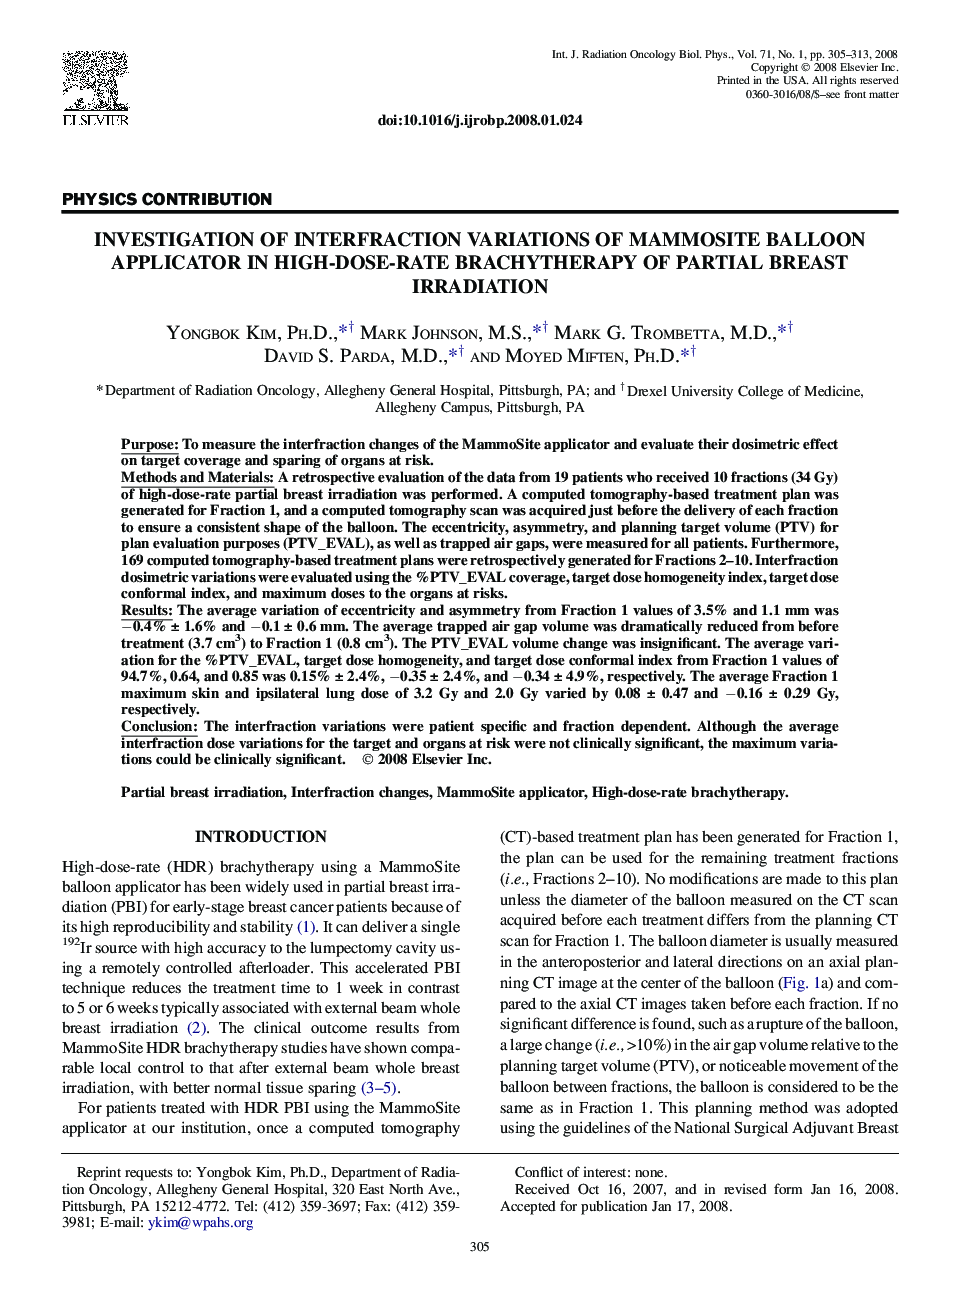 Investigation of Interfraction Variations of MammoSite Balloon Applicator in High-Dose-Rate Brachytherapy of Partial Breast Irradiation